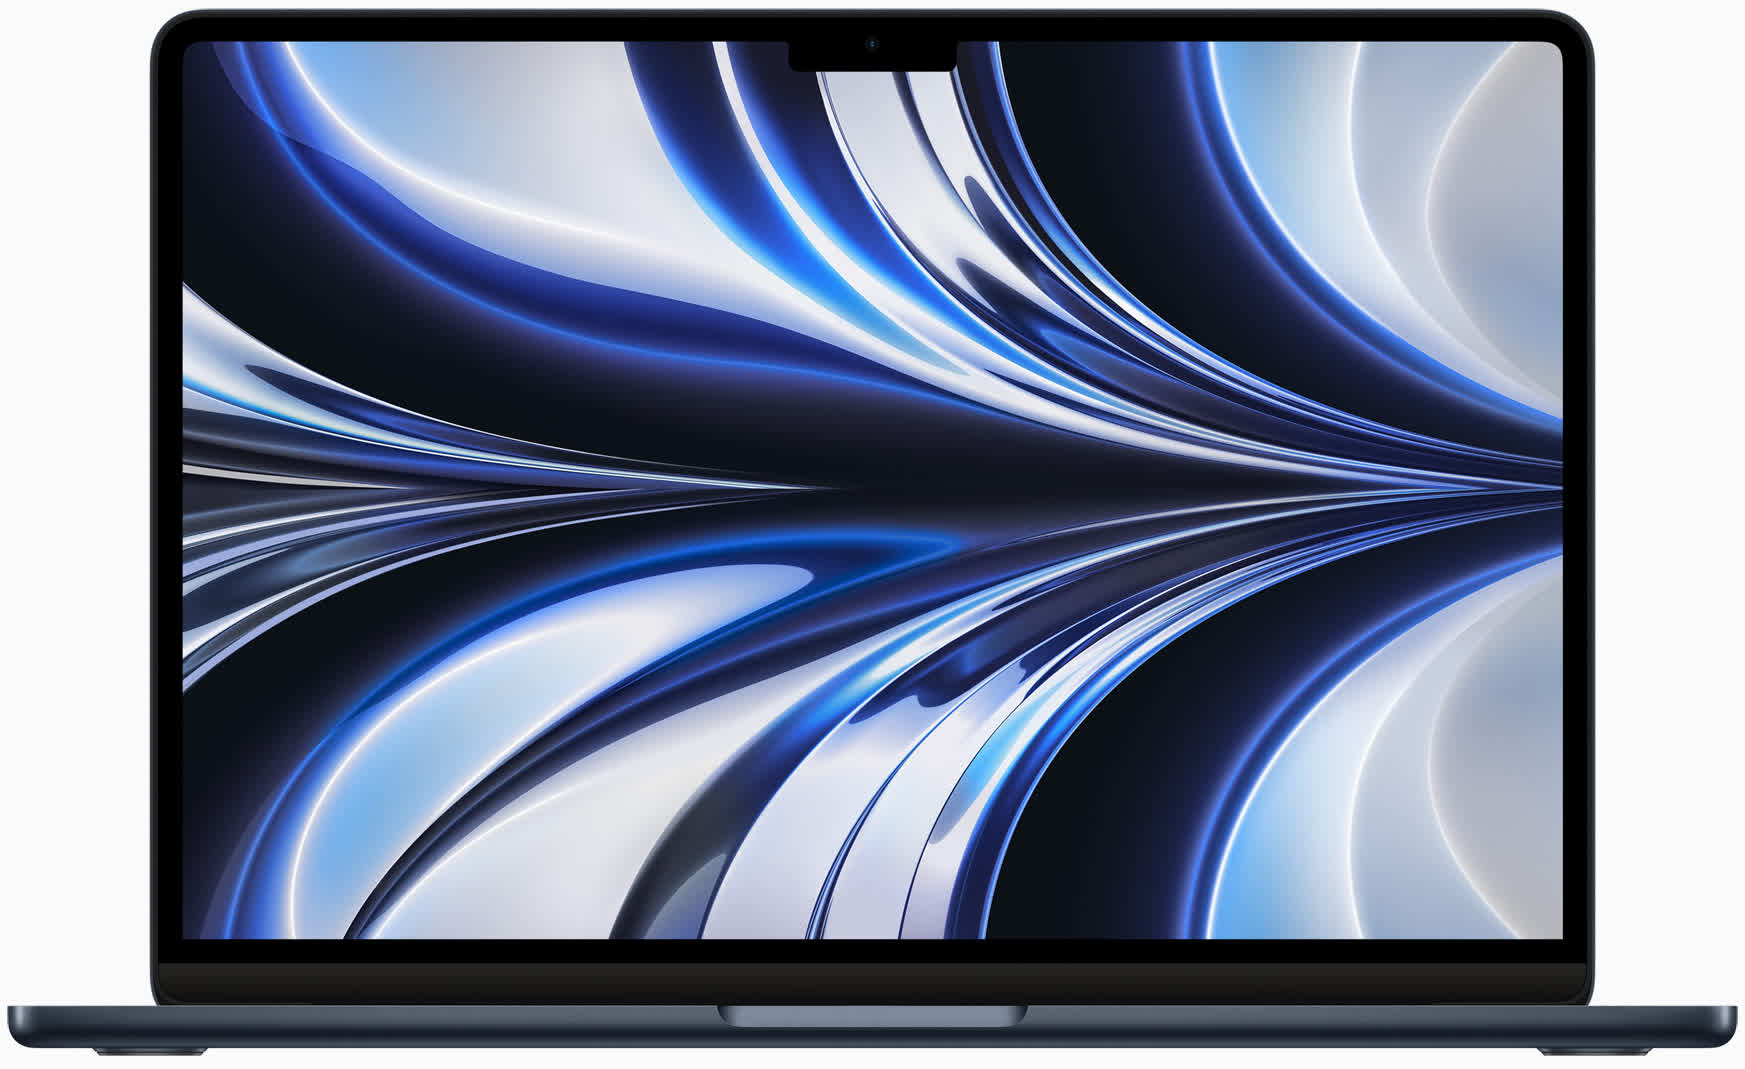 Redesigned MacBook Air gets M2 chip, MagSafe charging, and a bigger screen